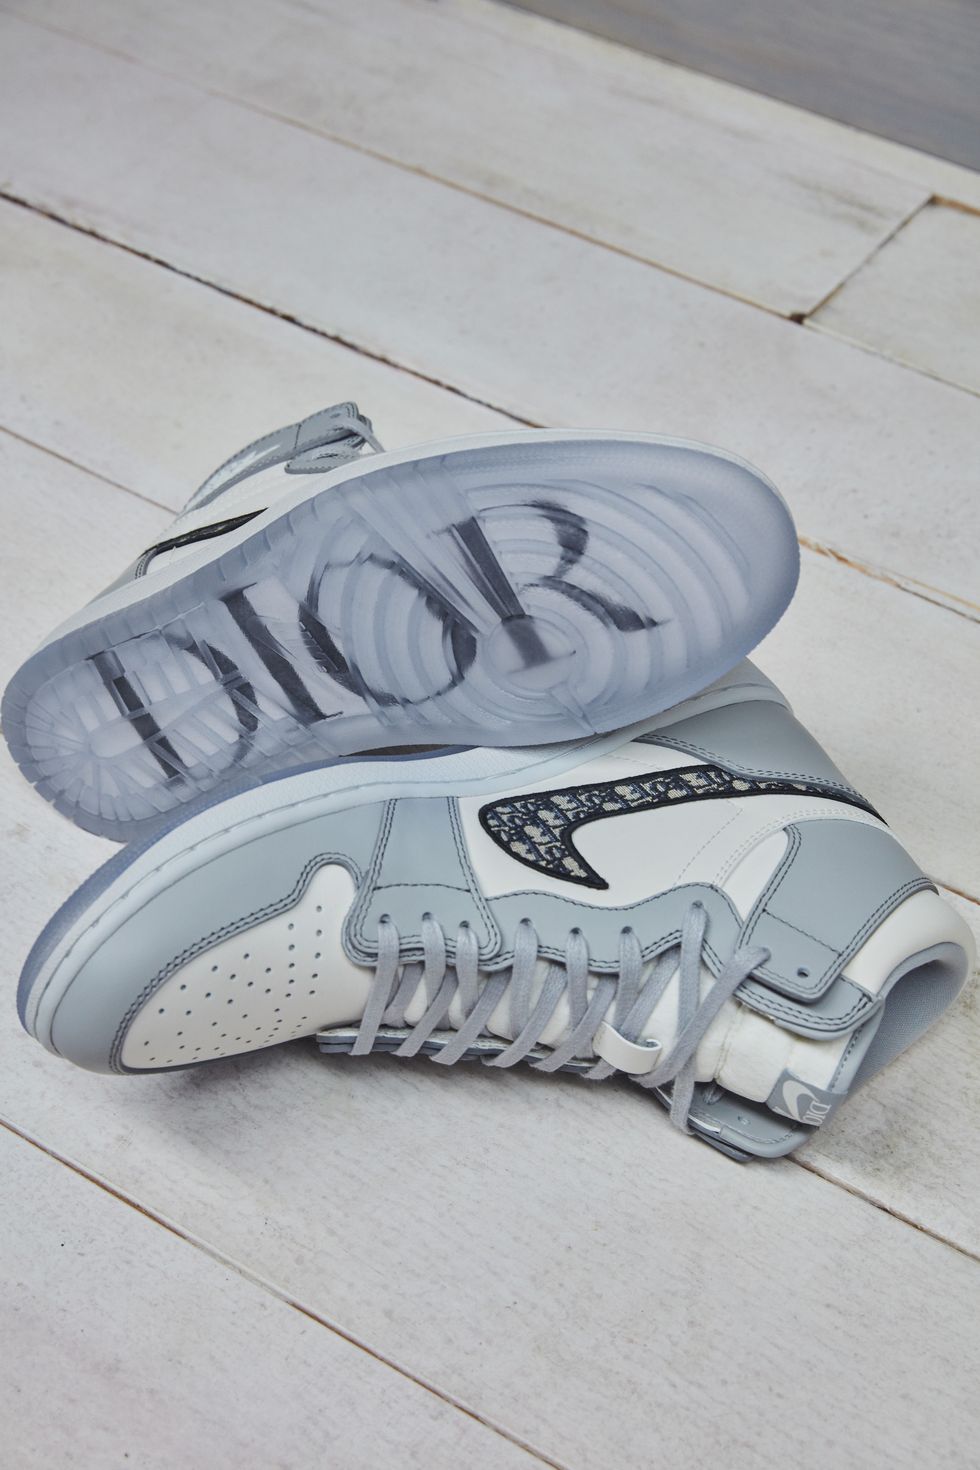 The Limited-Edition Air Jordan x Dior Collab Release Has Been Postponed -  GQ Middle East